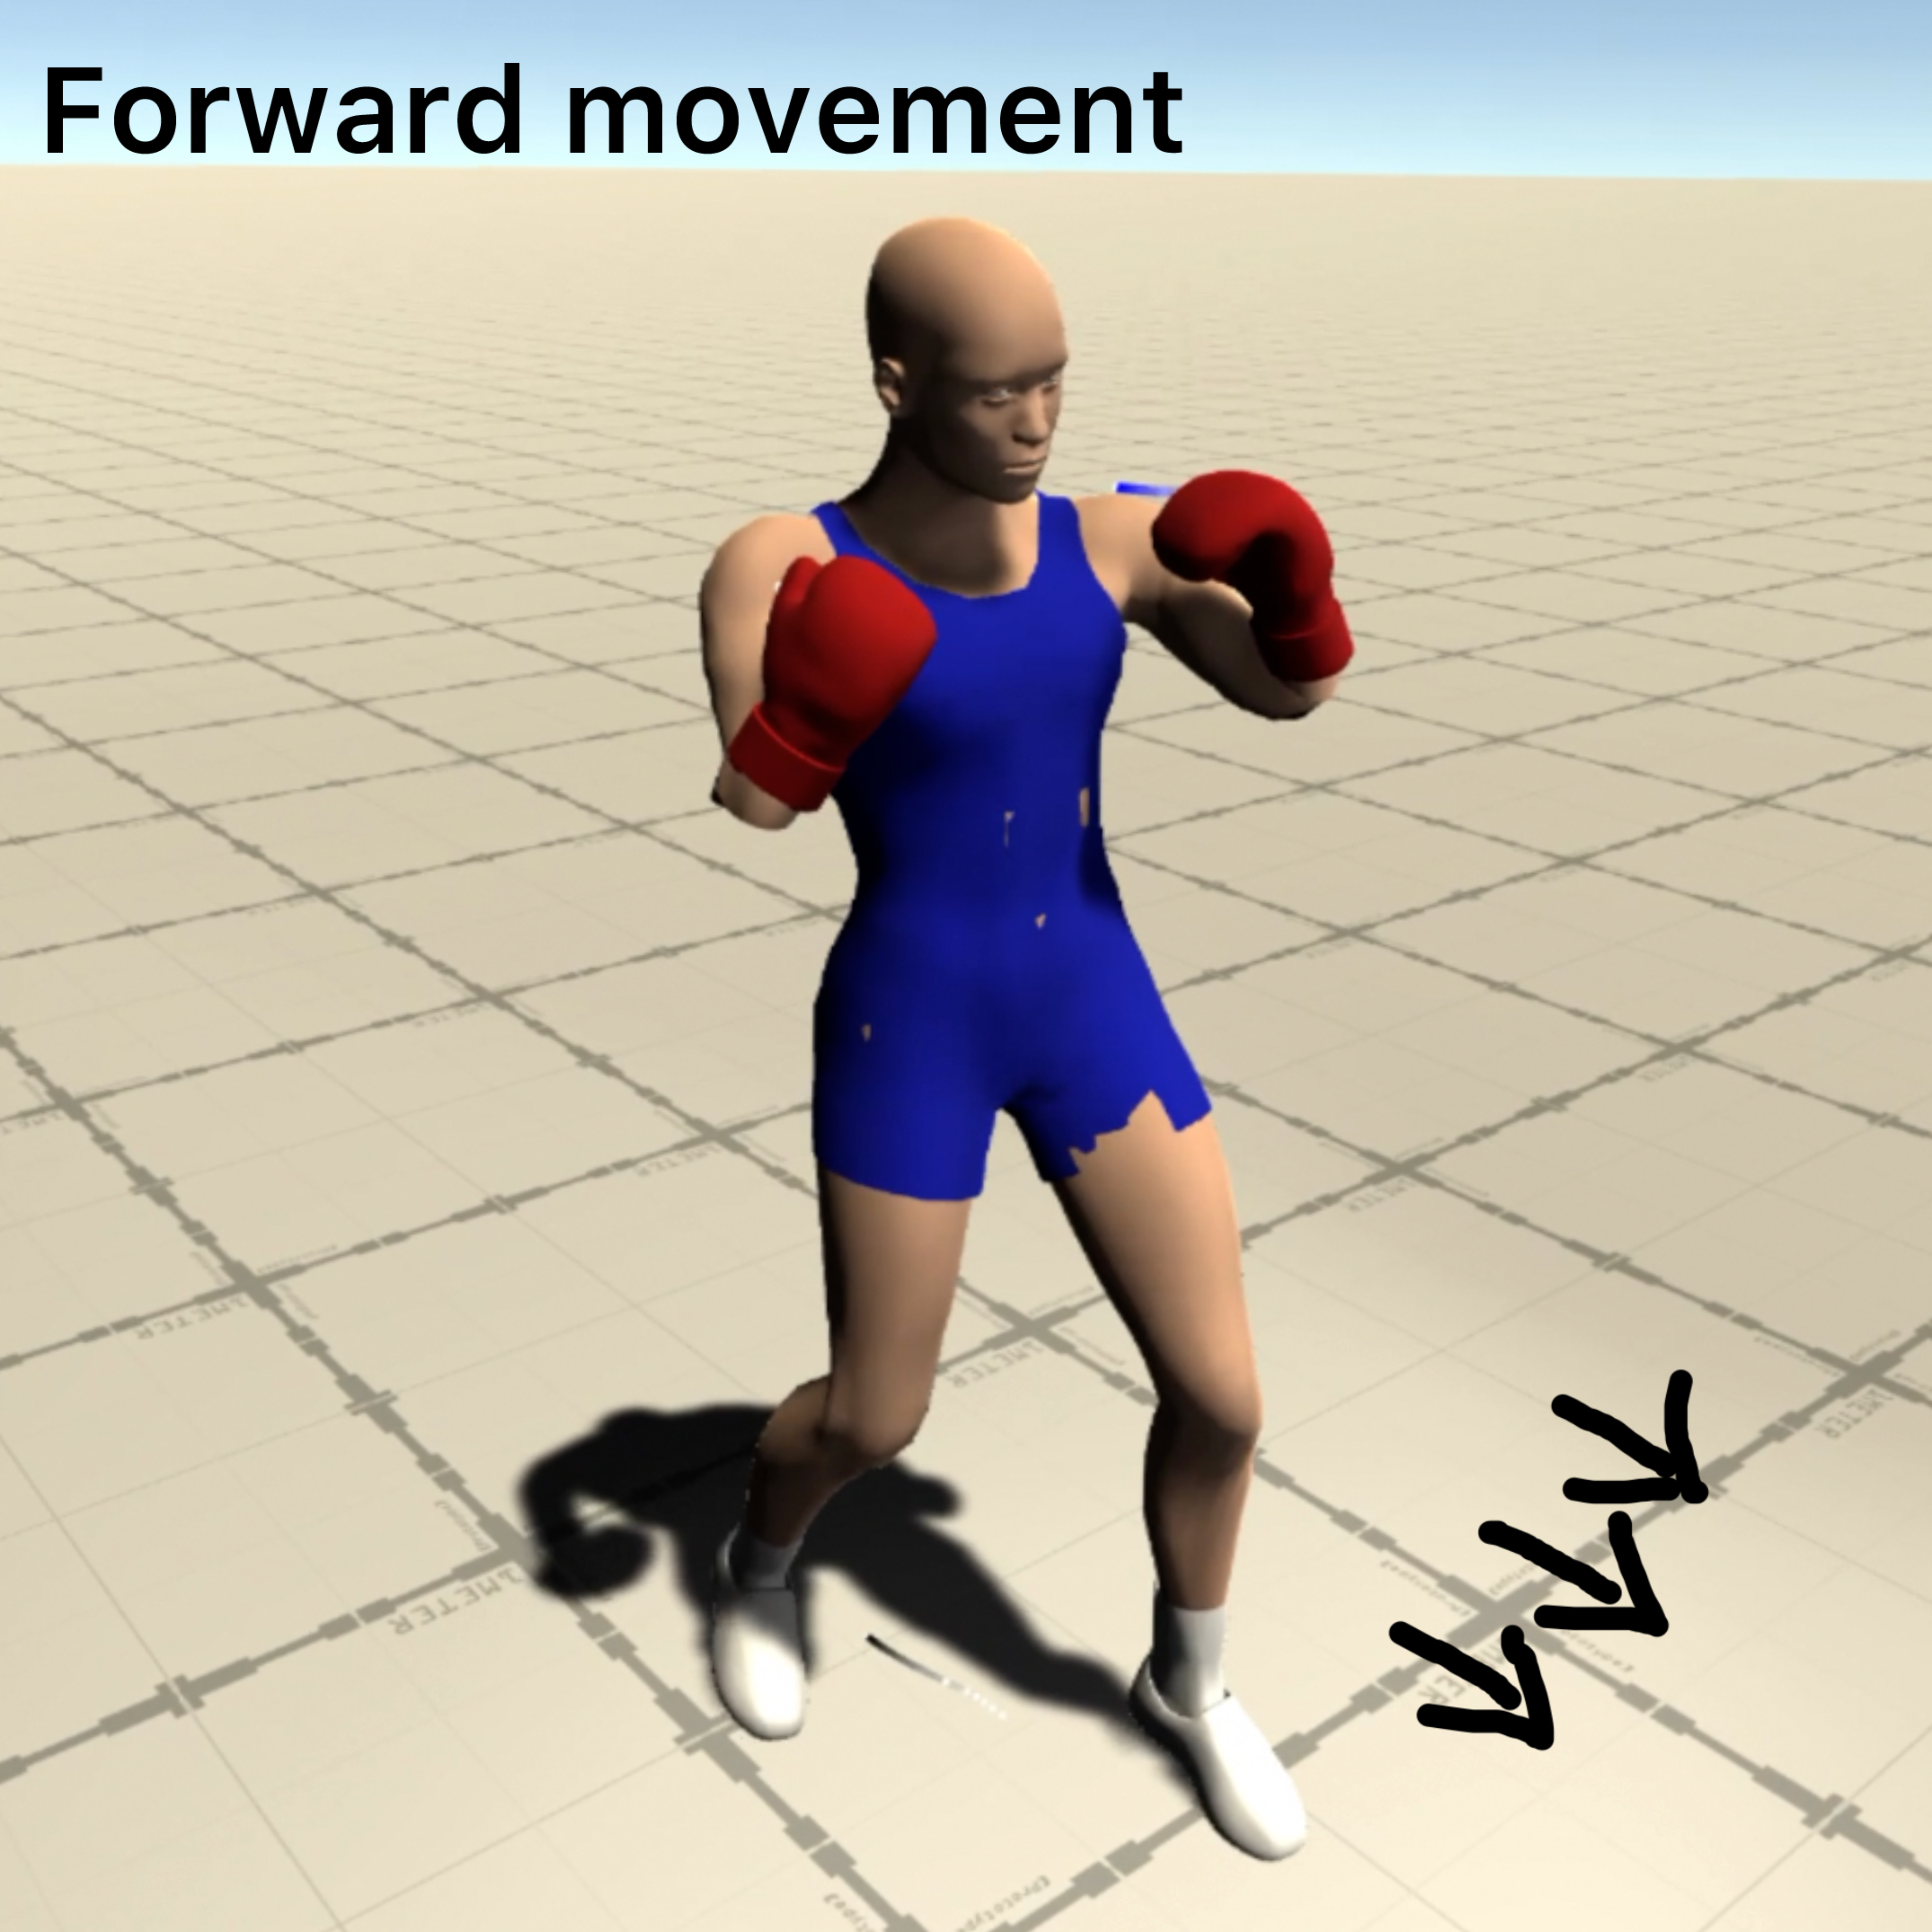 Forward movement with boxing posture